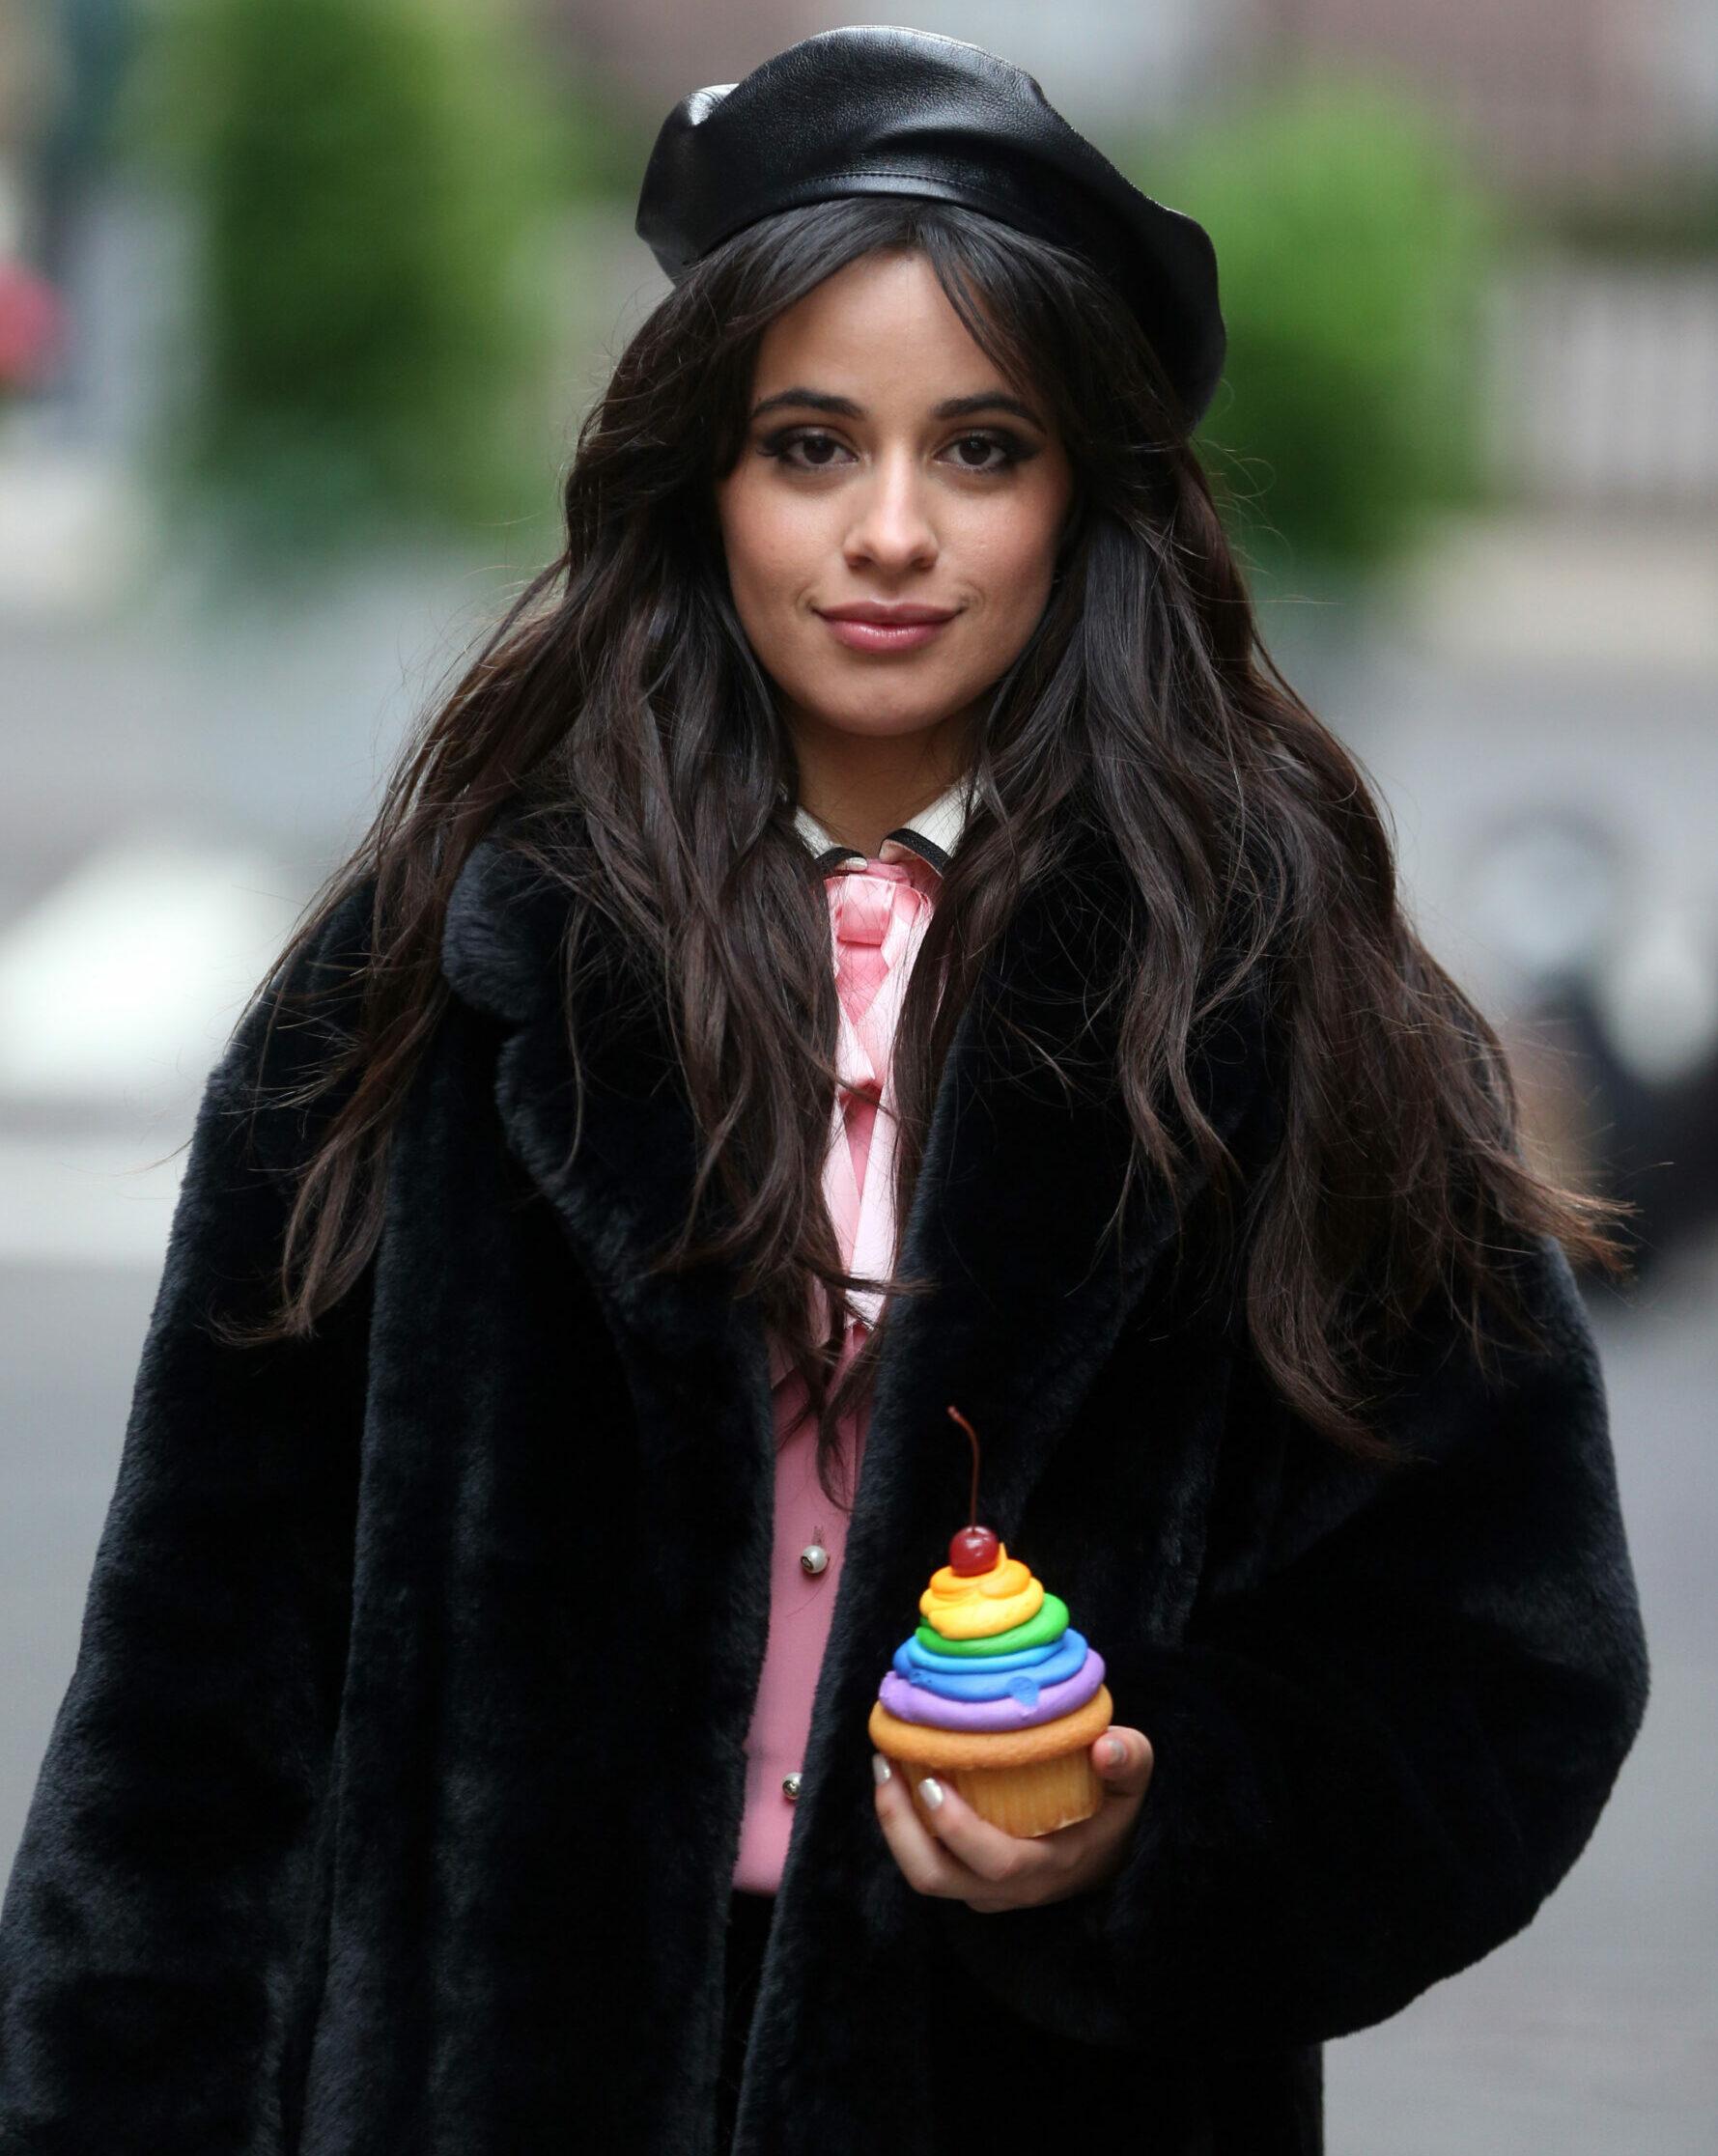 A photo showing Camila Cabello in a black fur jacket and hat to match, holding a rainbow cup-cake.